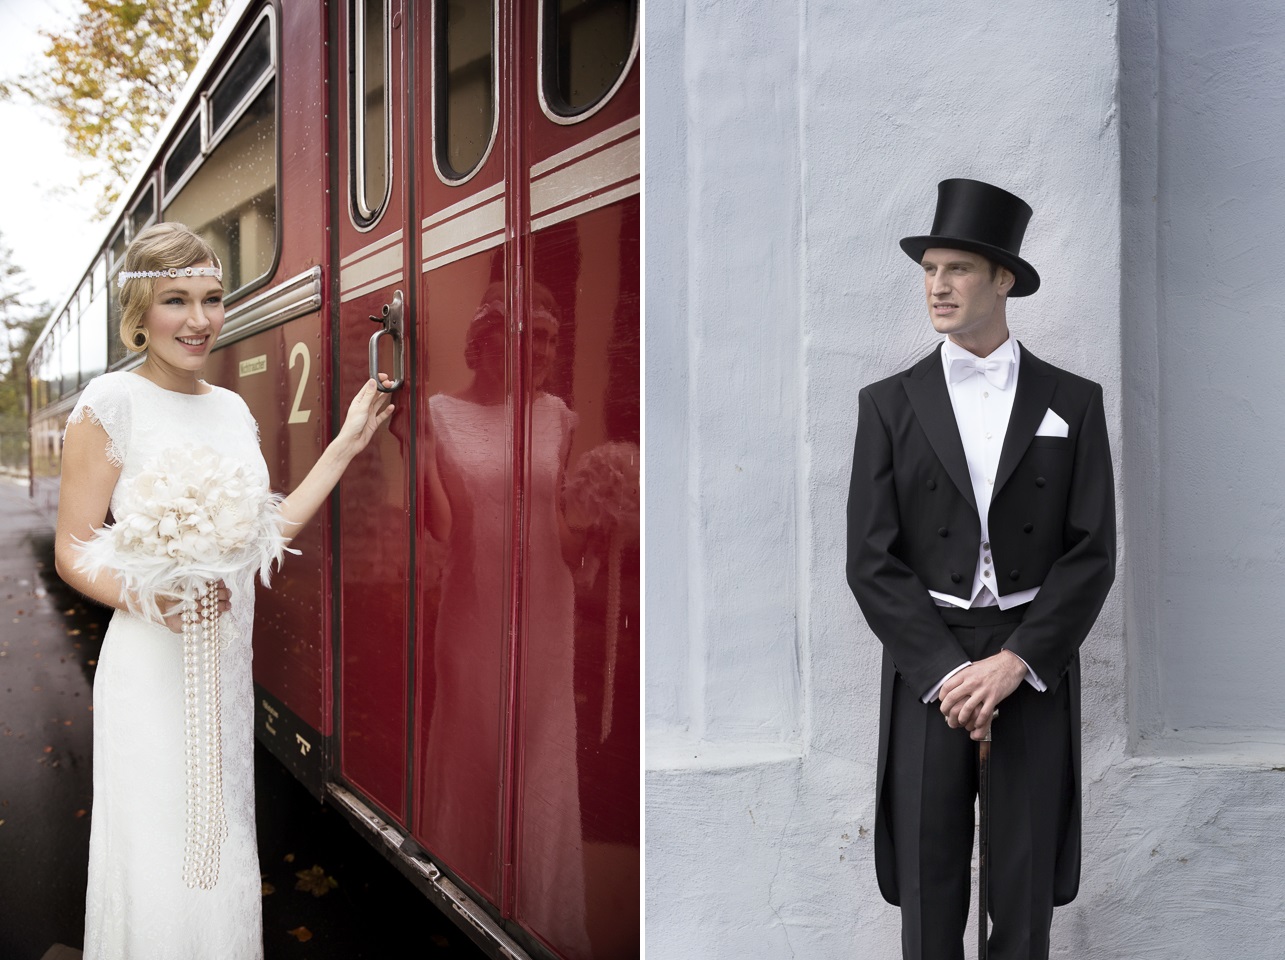 Vintage Wedding Ideas in Ivory & Gold Inspired by the 1930s